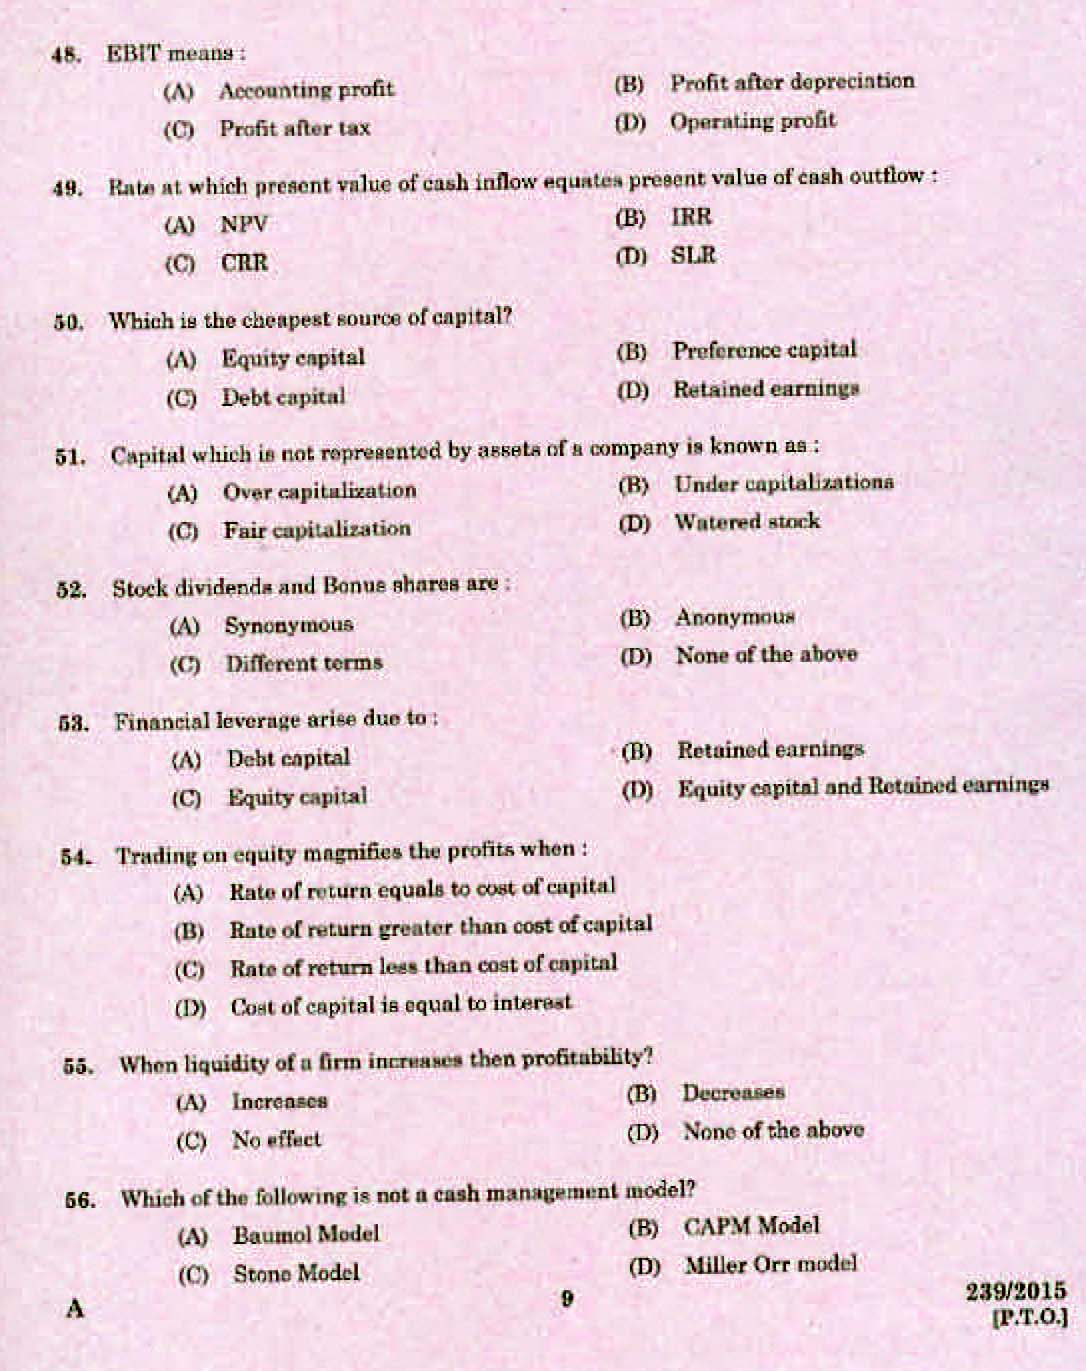 Kerala PSC Accounts Officer OMR Exam 2015 Question Paper Code 2392015 7